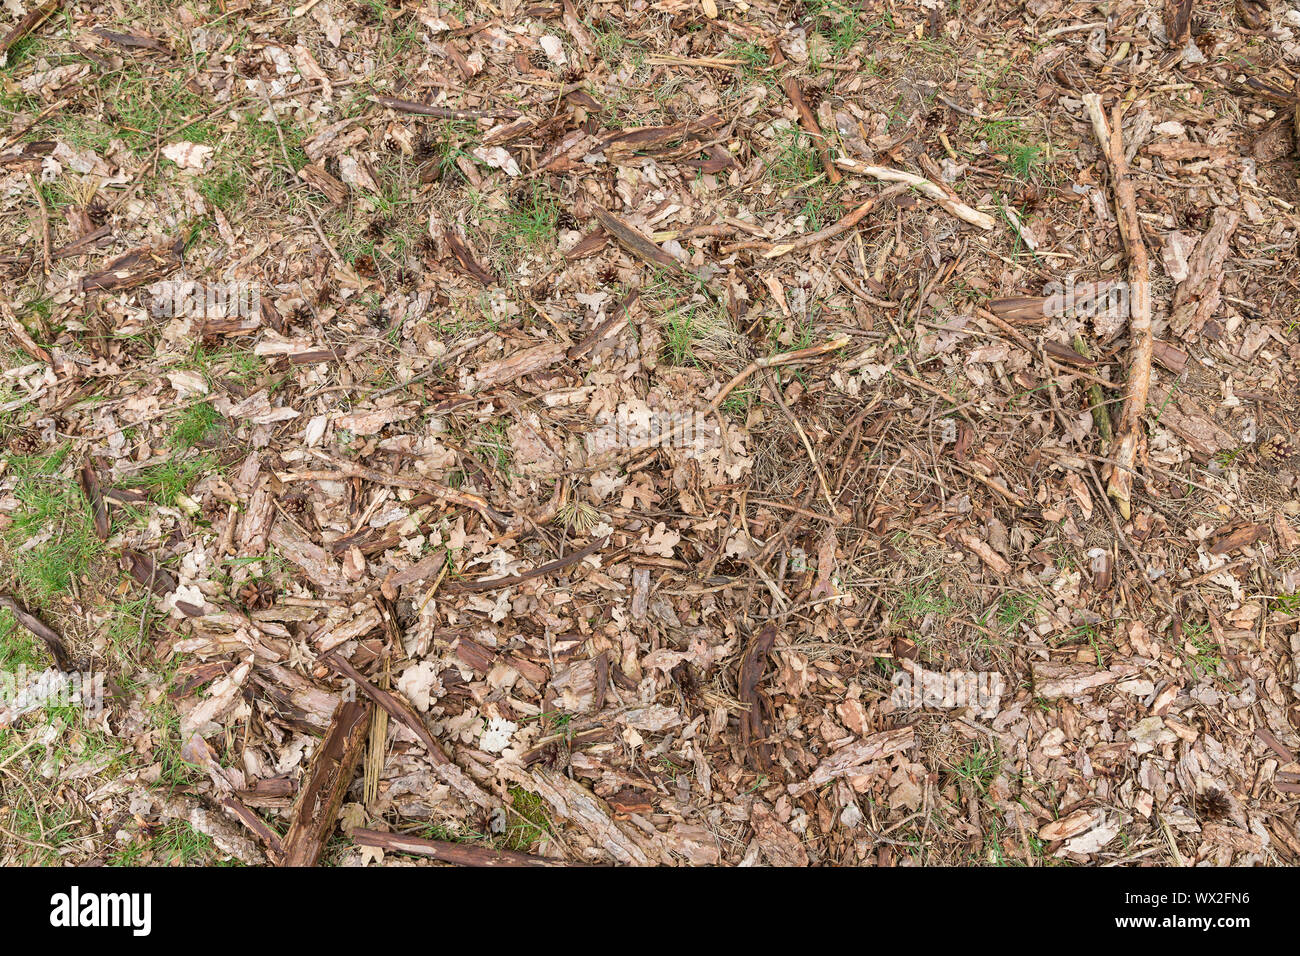 Background of forest floor with wood chips, sprigs, leafs, grass and pine cones Stock Photo